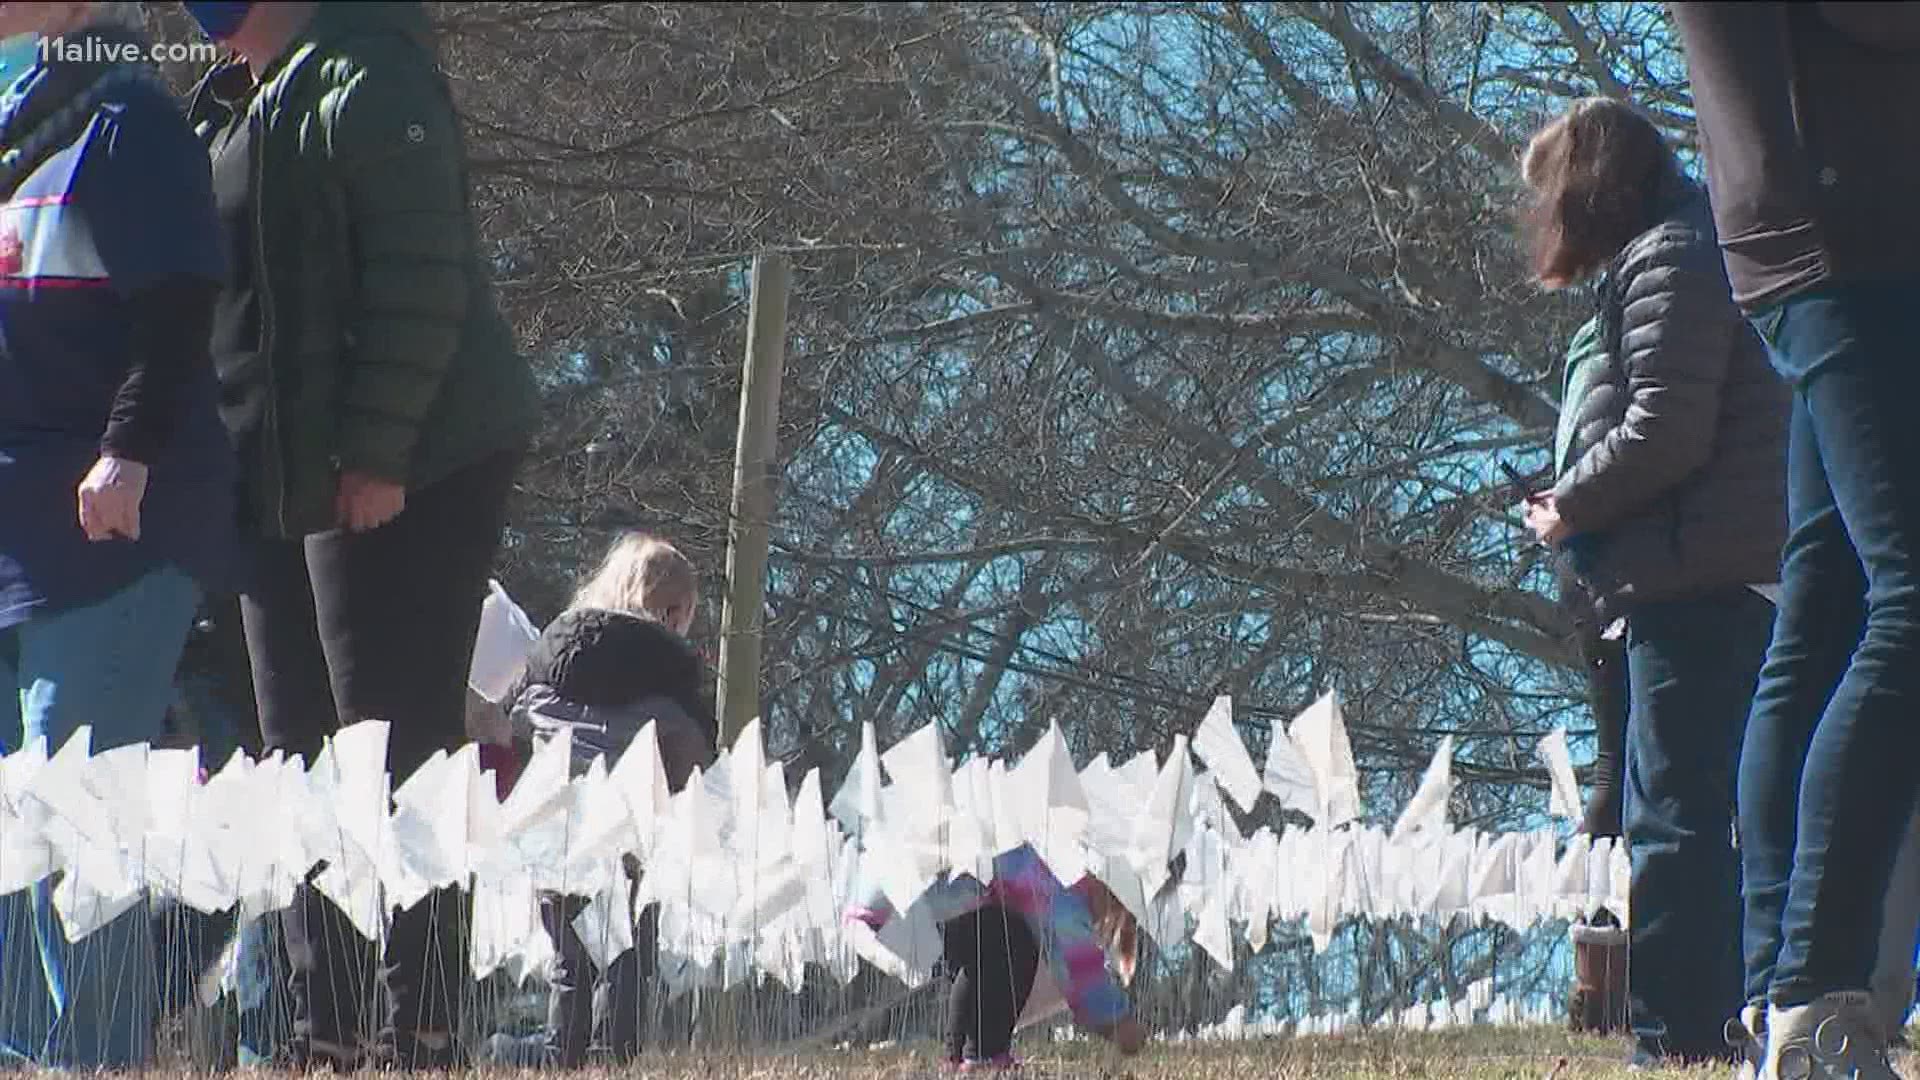 Each flag represents one of the 14,629 victims.